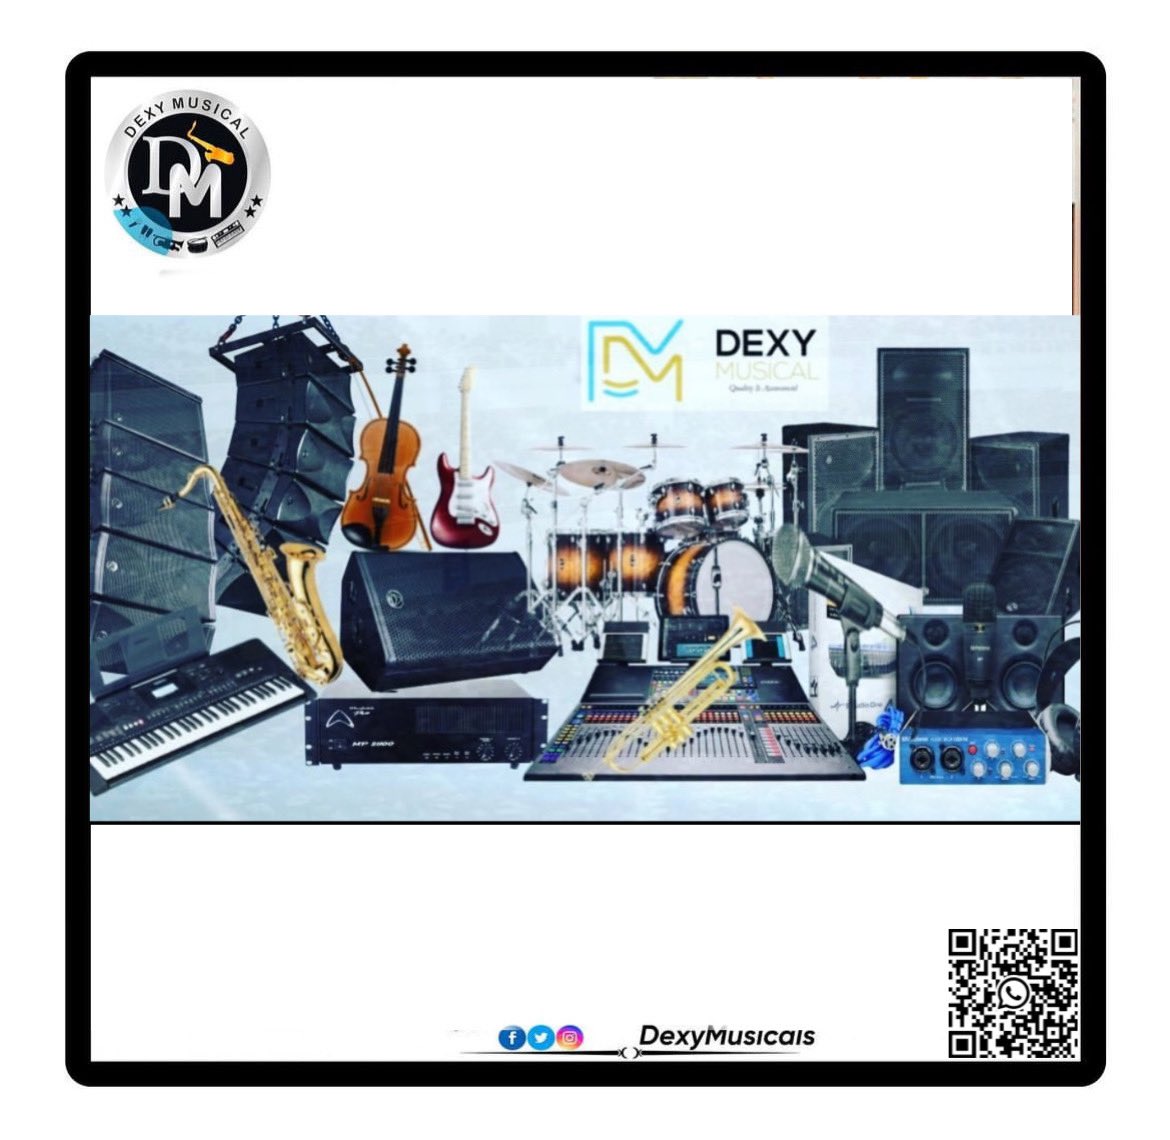 Musical instruments are available

Good morning dear clients

We are open

#musicalinstruments #guitar #piano #drums #violin #bass #musician #musicstore #saxophone #ukulele #keyboard #acousticguitar #electricguitar #cello #percussion #flute #trumpet #amplifier #bassguitar